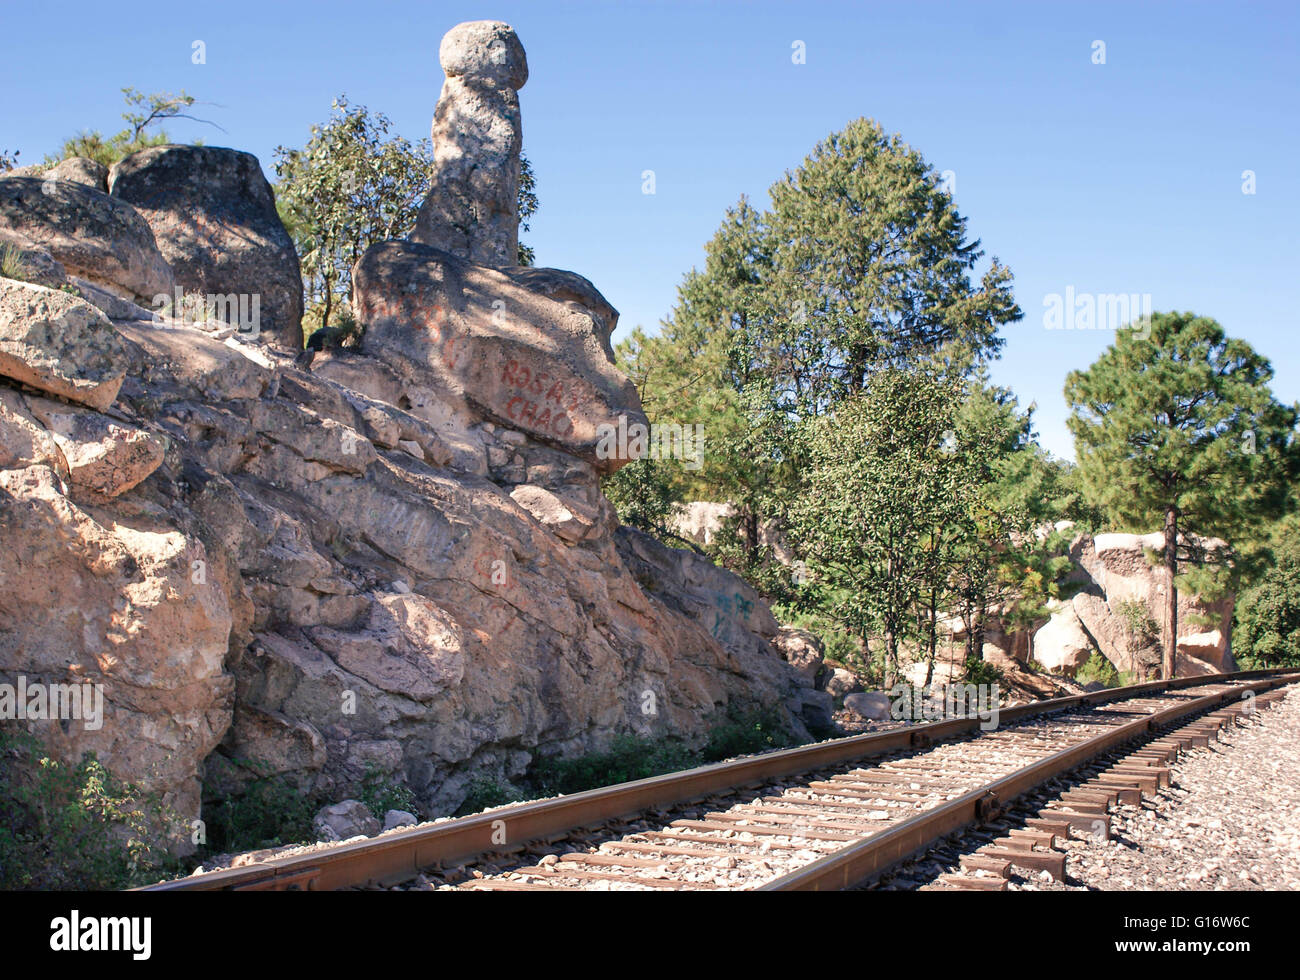 The landscape with the Copper Canyons railway road near Creel, Chihuahua, Mexico Stock Photo